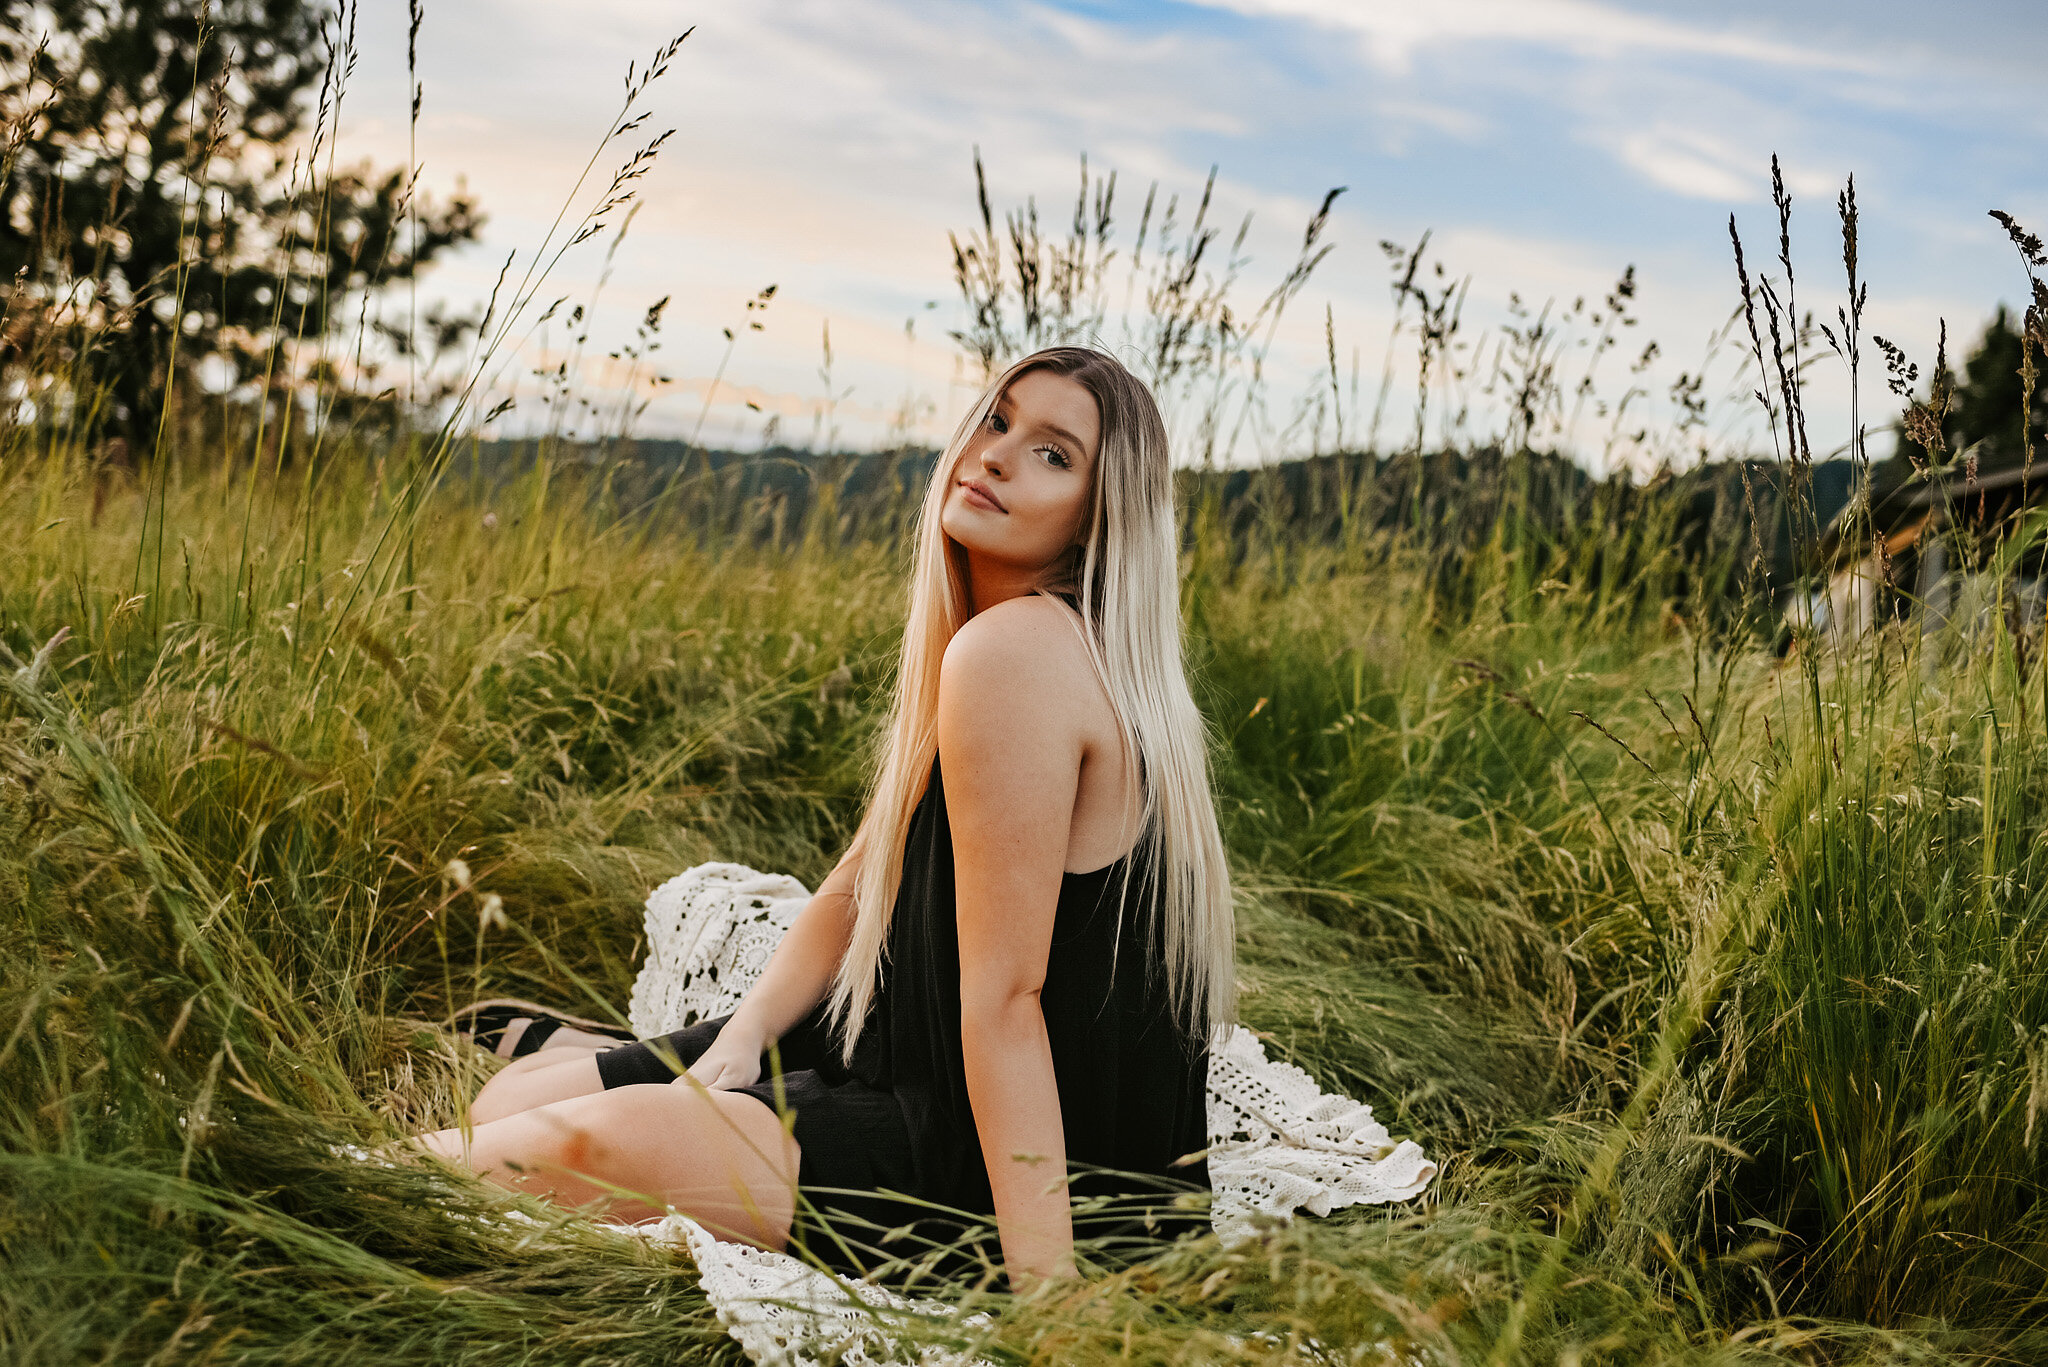 Senior girl in field, sitting down on blanket looking at photographer